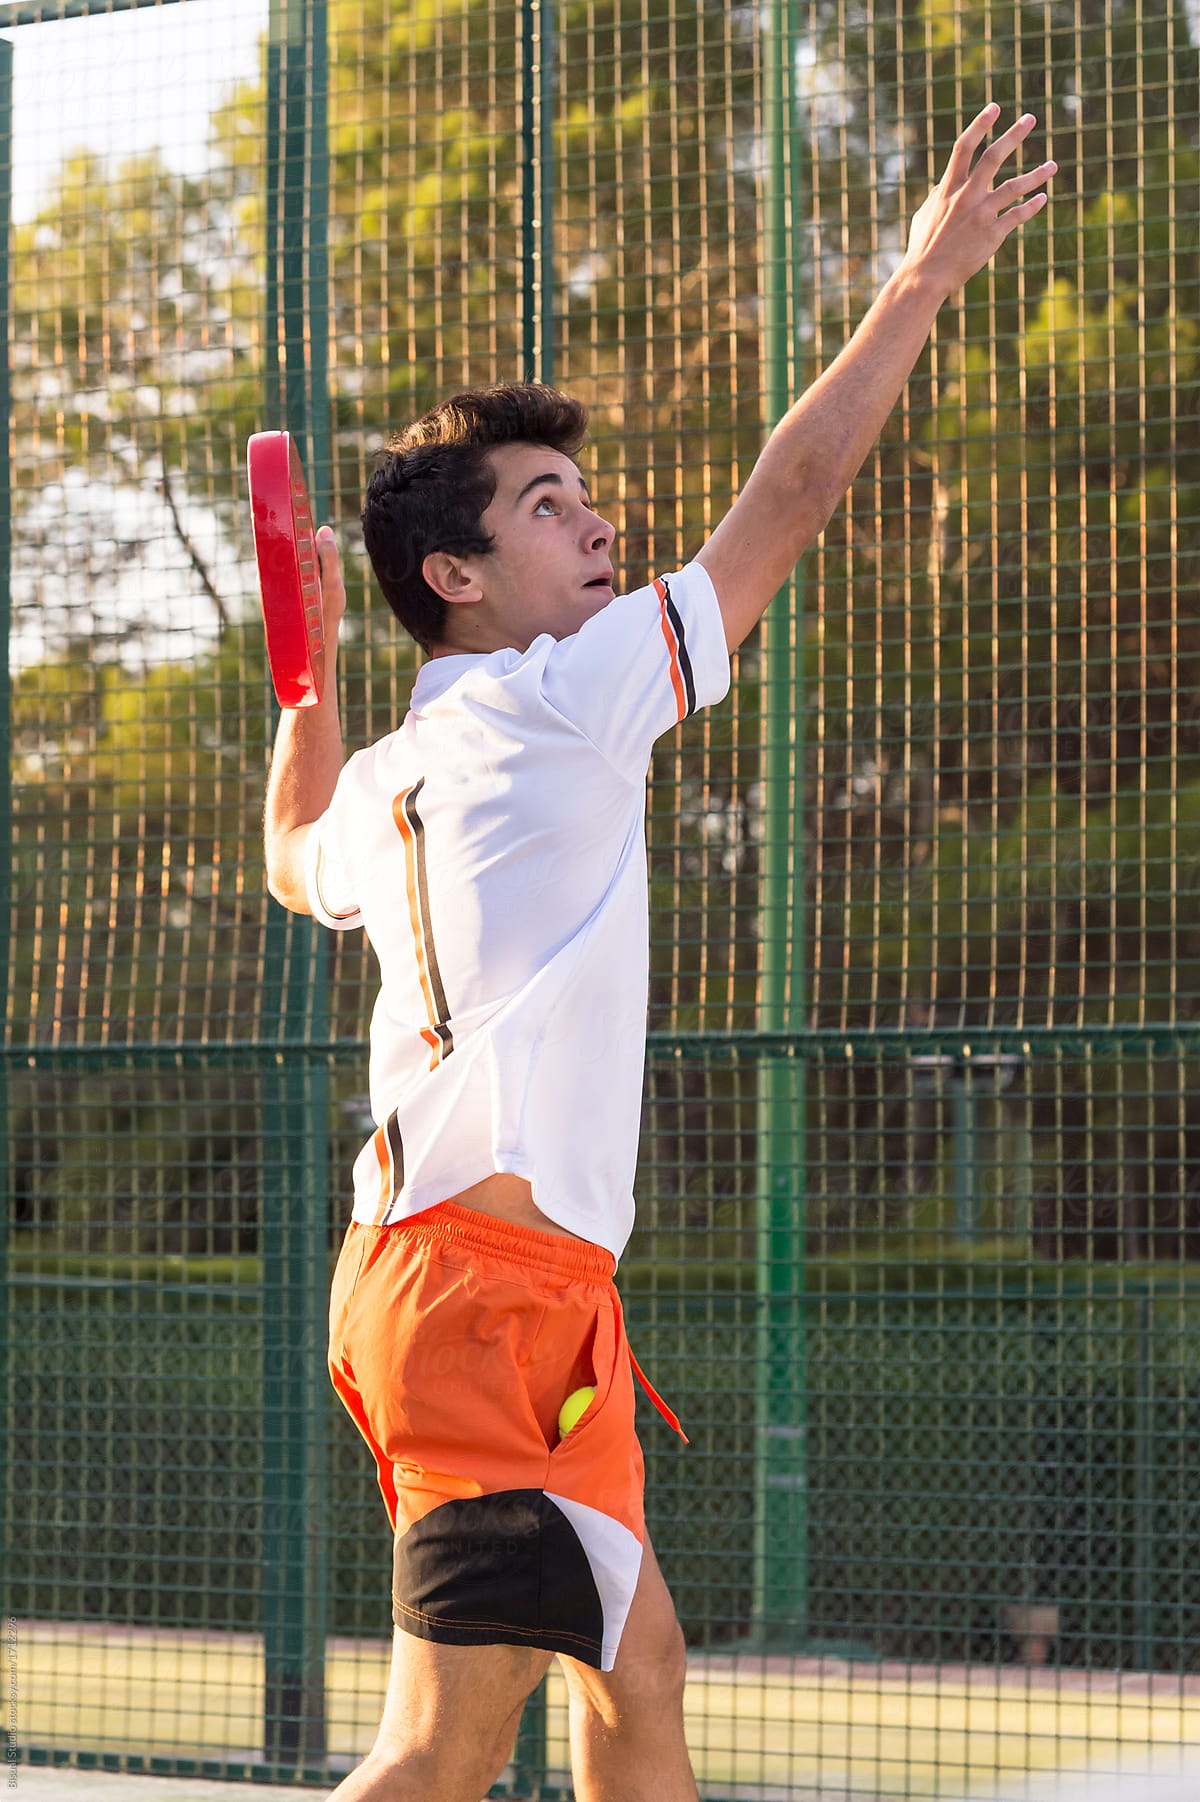 Young boy Playing Paddle Tennis Outdoors